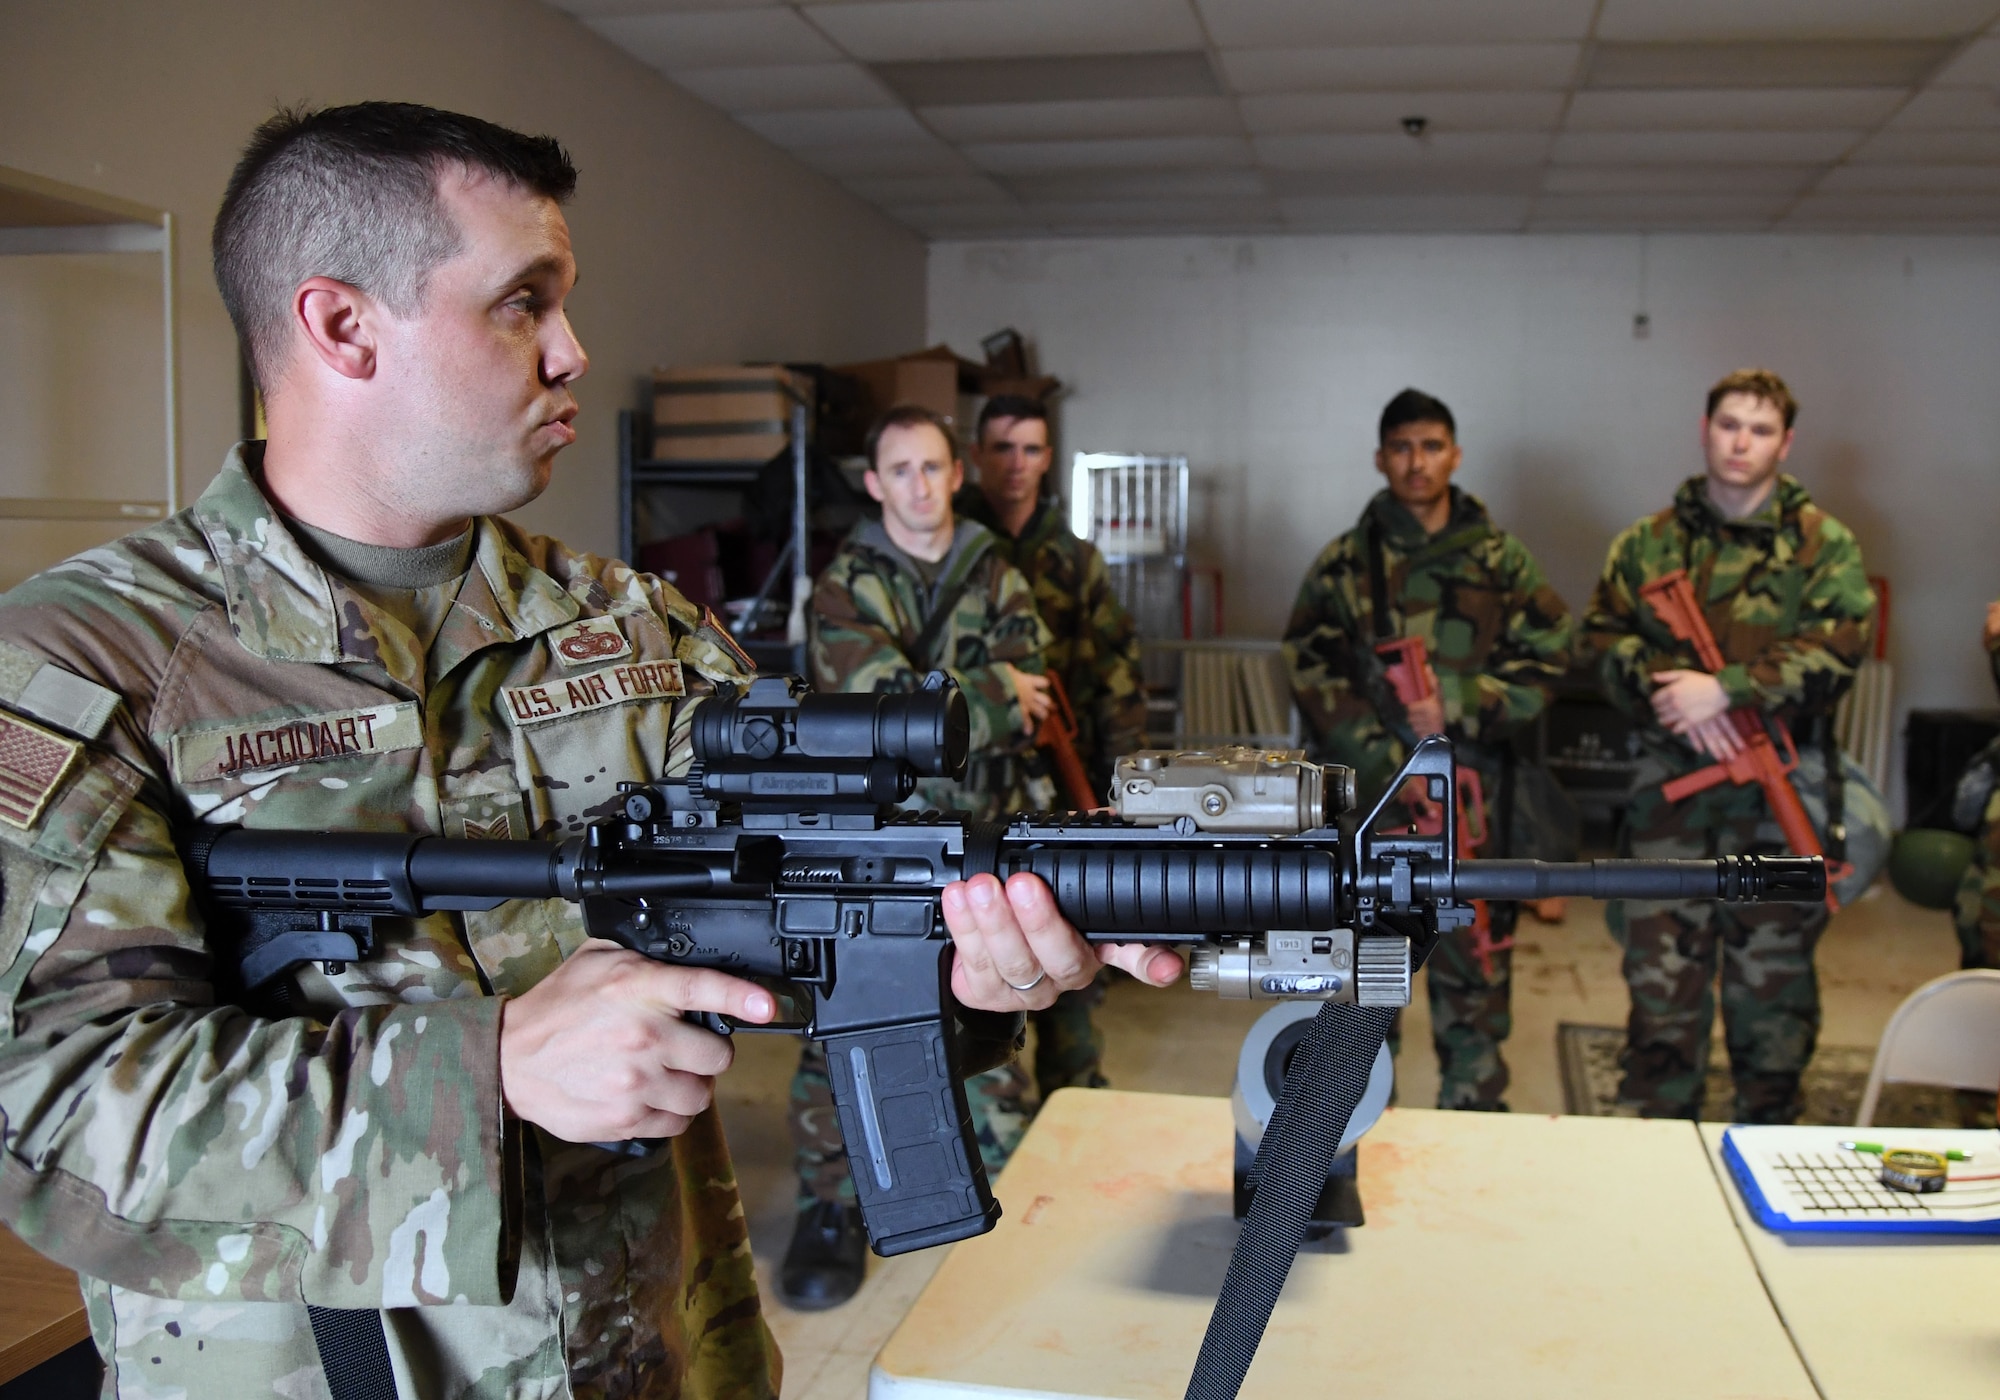 U.S. Air Force Tech. Sgt. Peter Jacquart, 81st Security Forces Squadron standardization and evaluations noncommssioned officer in charge, reviews weapons clearing procedures with Keesler personnel during a small scale readiness assessment at Keesler Air Force Base, Mississippi, May 18, 2022. The assessment allowed Keesler personnel to be evaluated on their basic life saving skills in preparation of real-world events. (U.S. Air Force photo by Kemberly Groue)